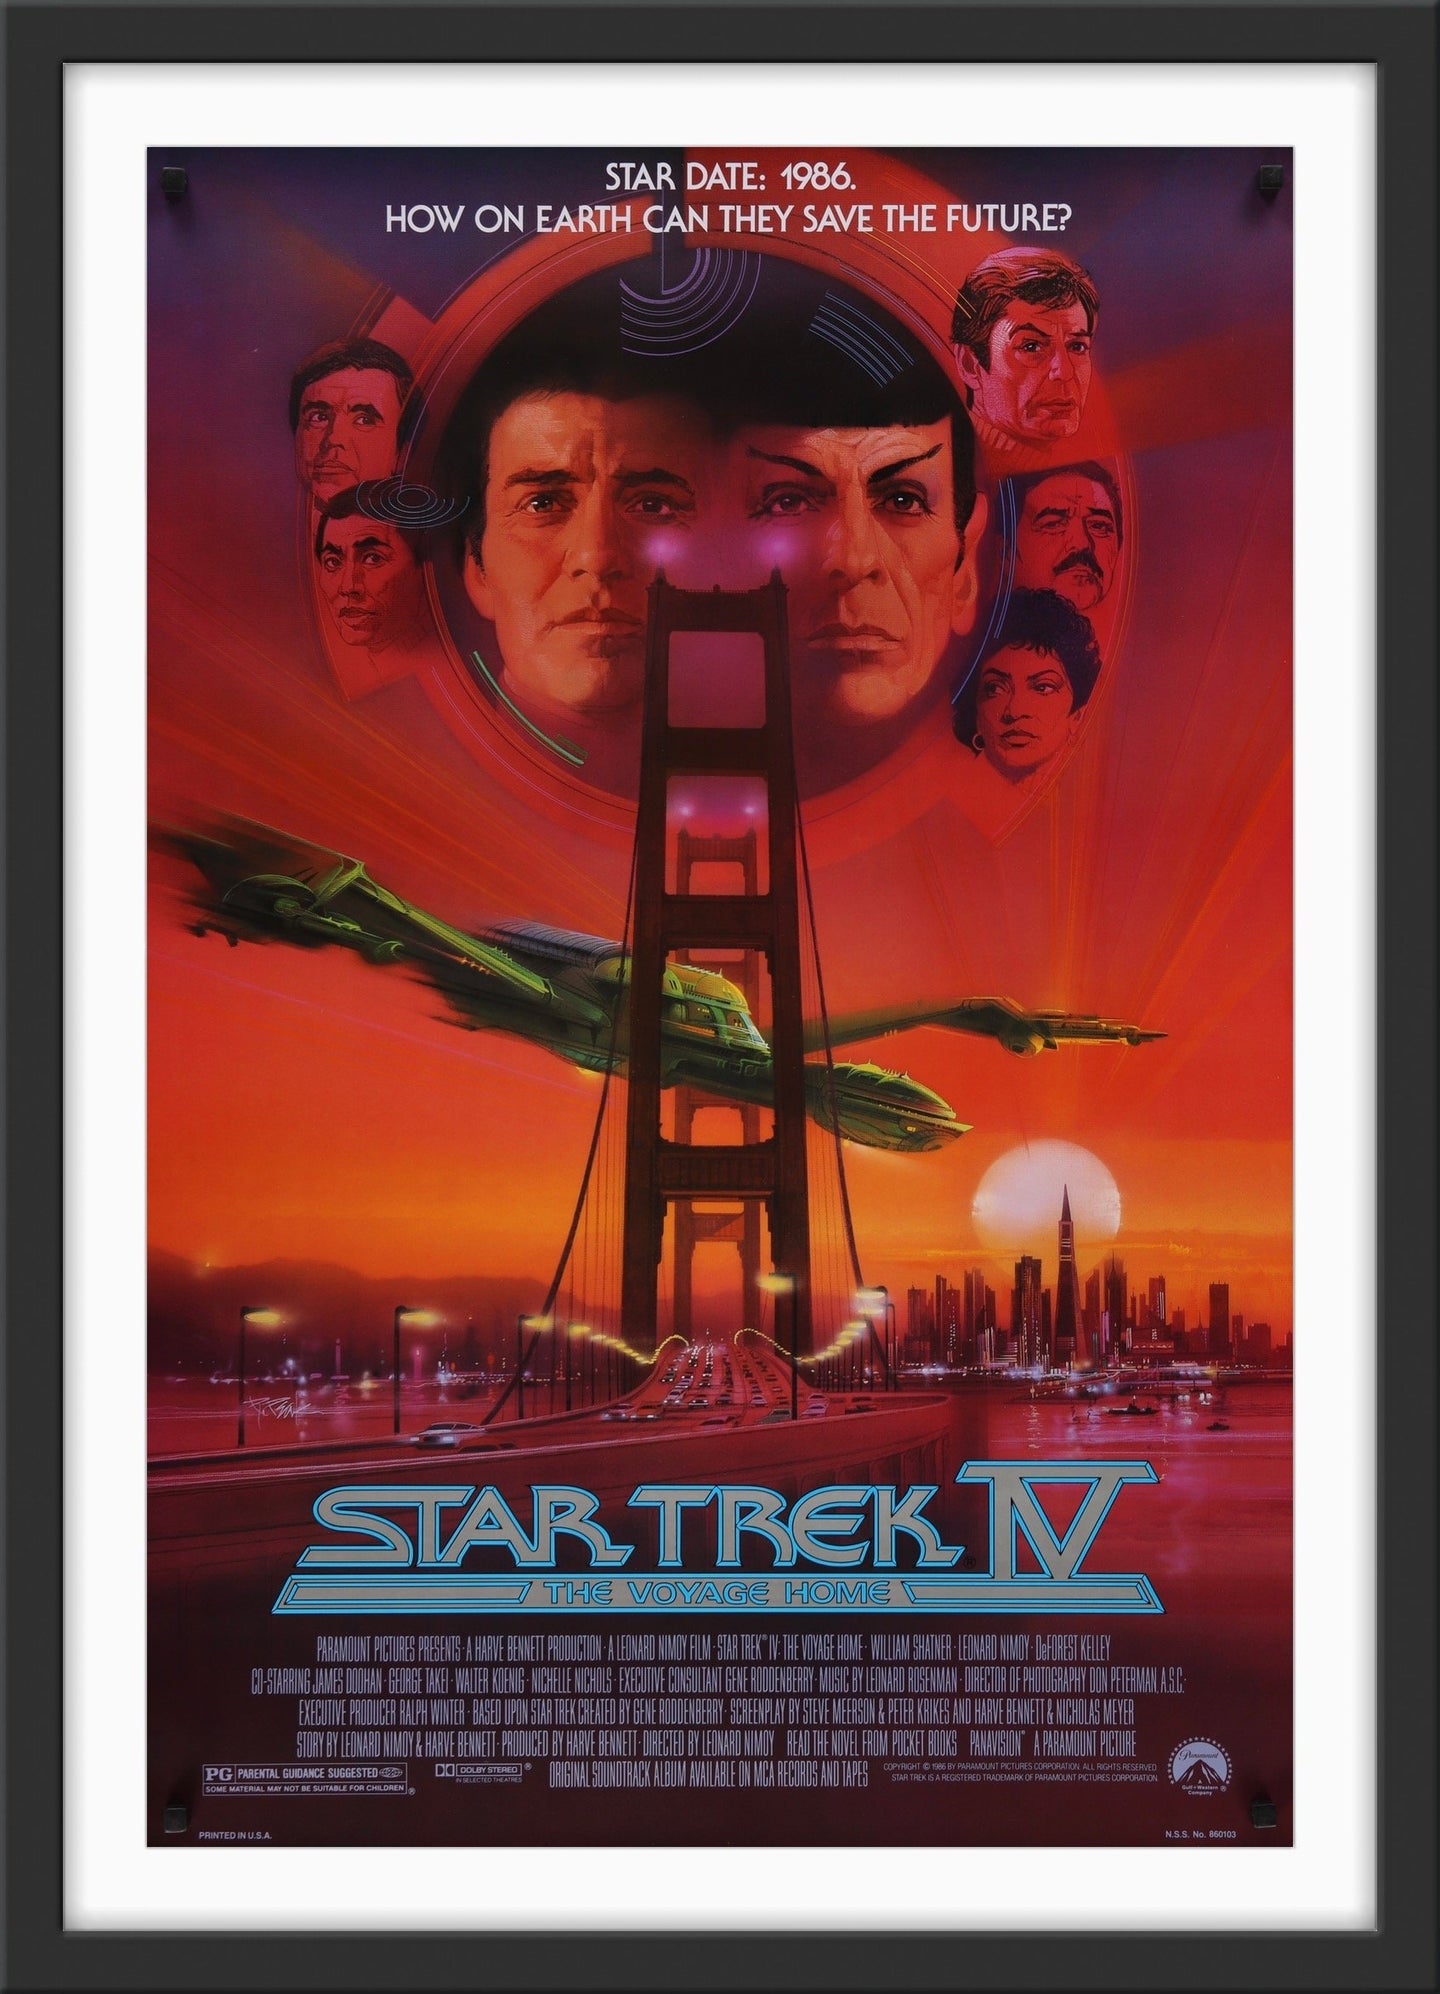 An original movie poster for the film Star Trek IV The Voyage Home